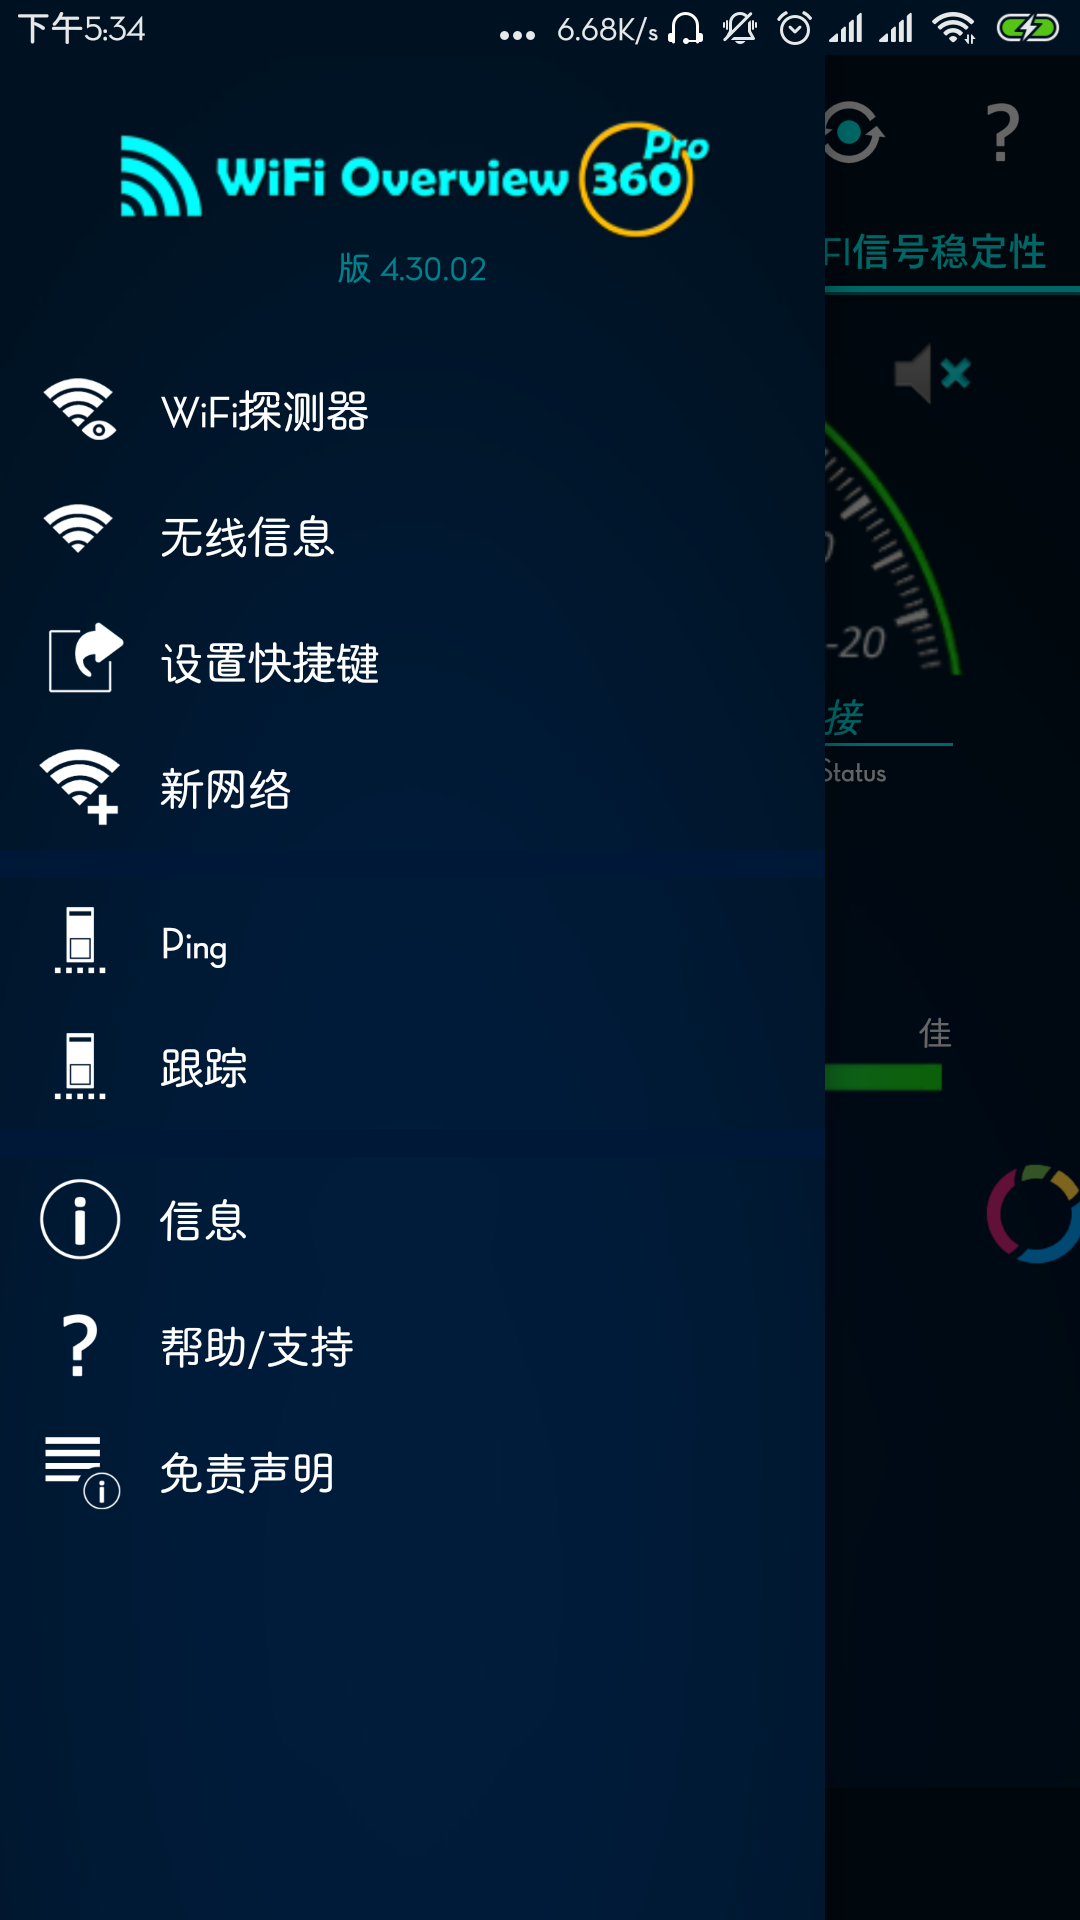 WIFIϢ鿴(WiFi Overview 360 Pro)